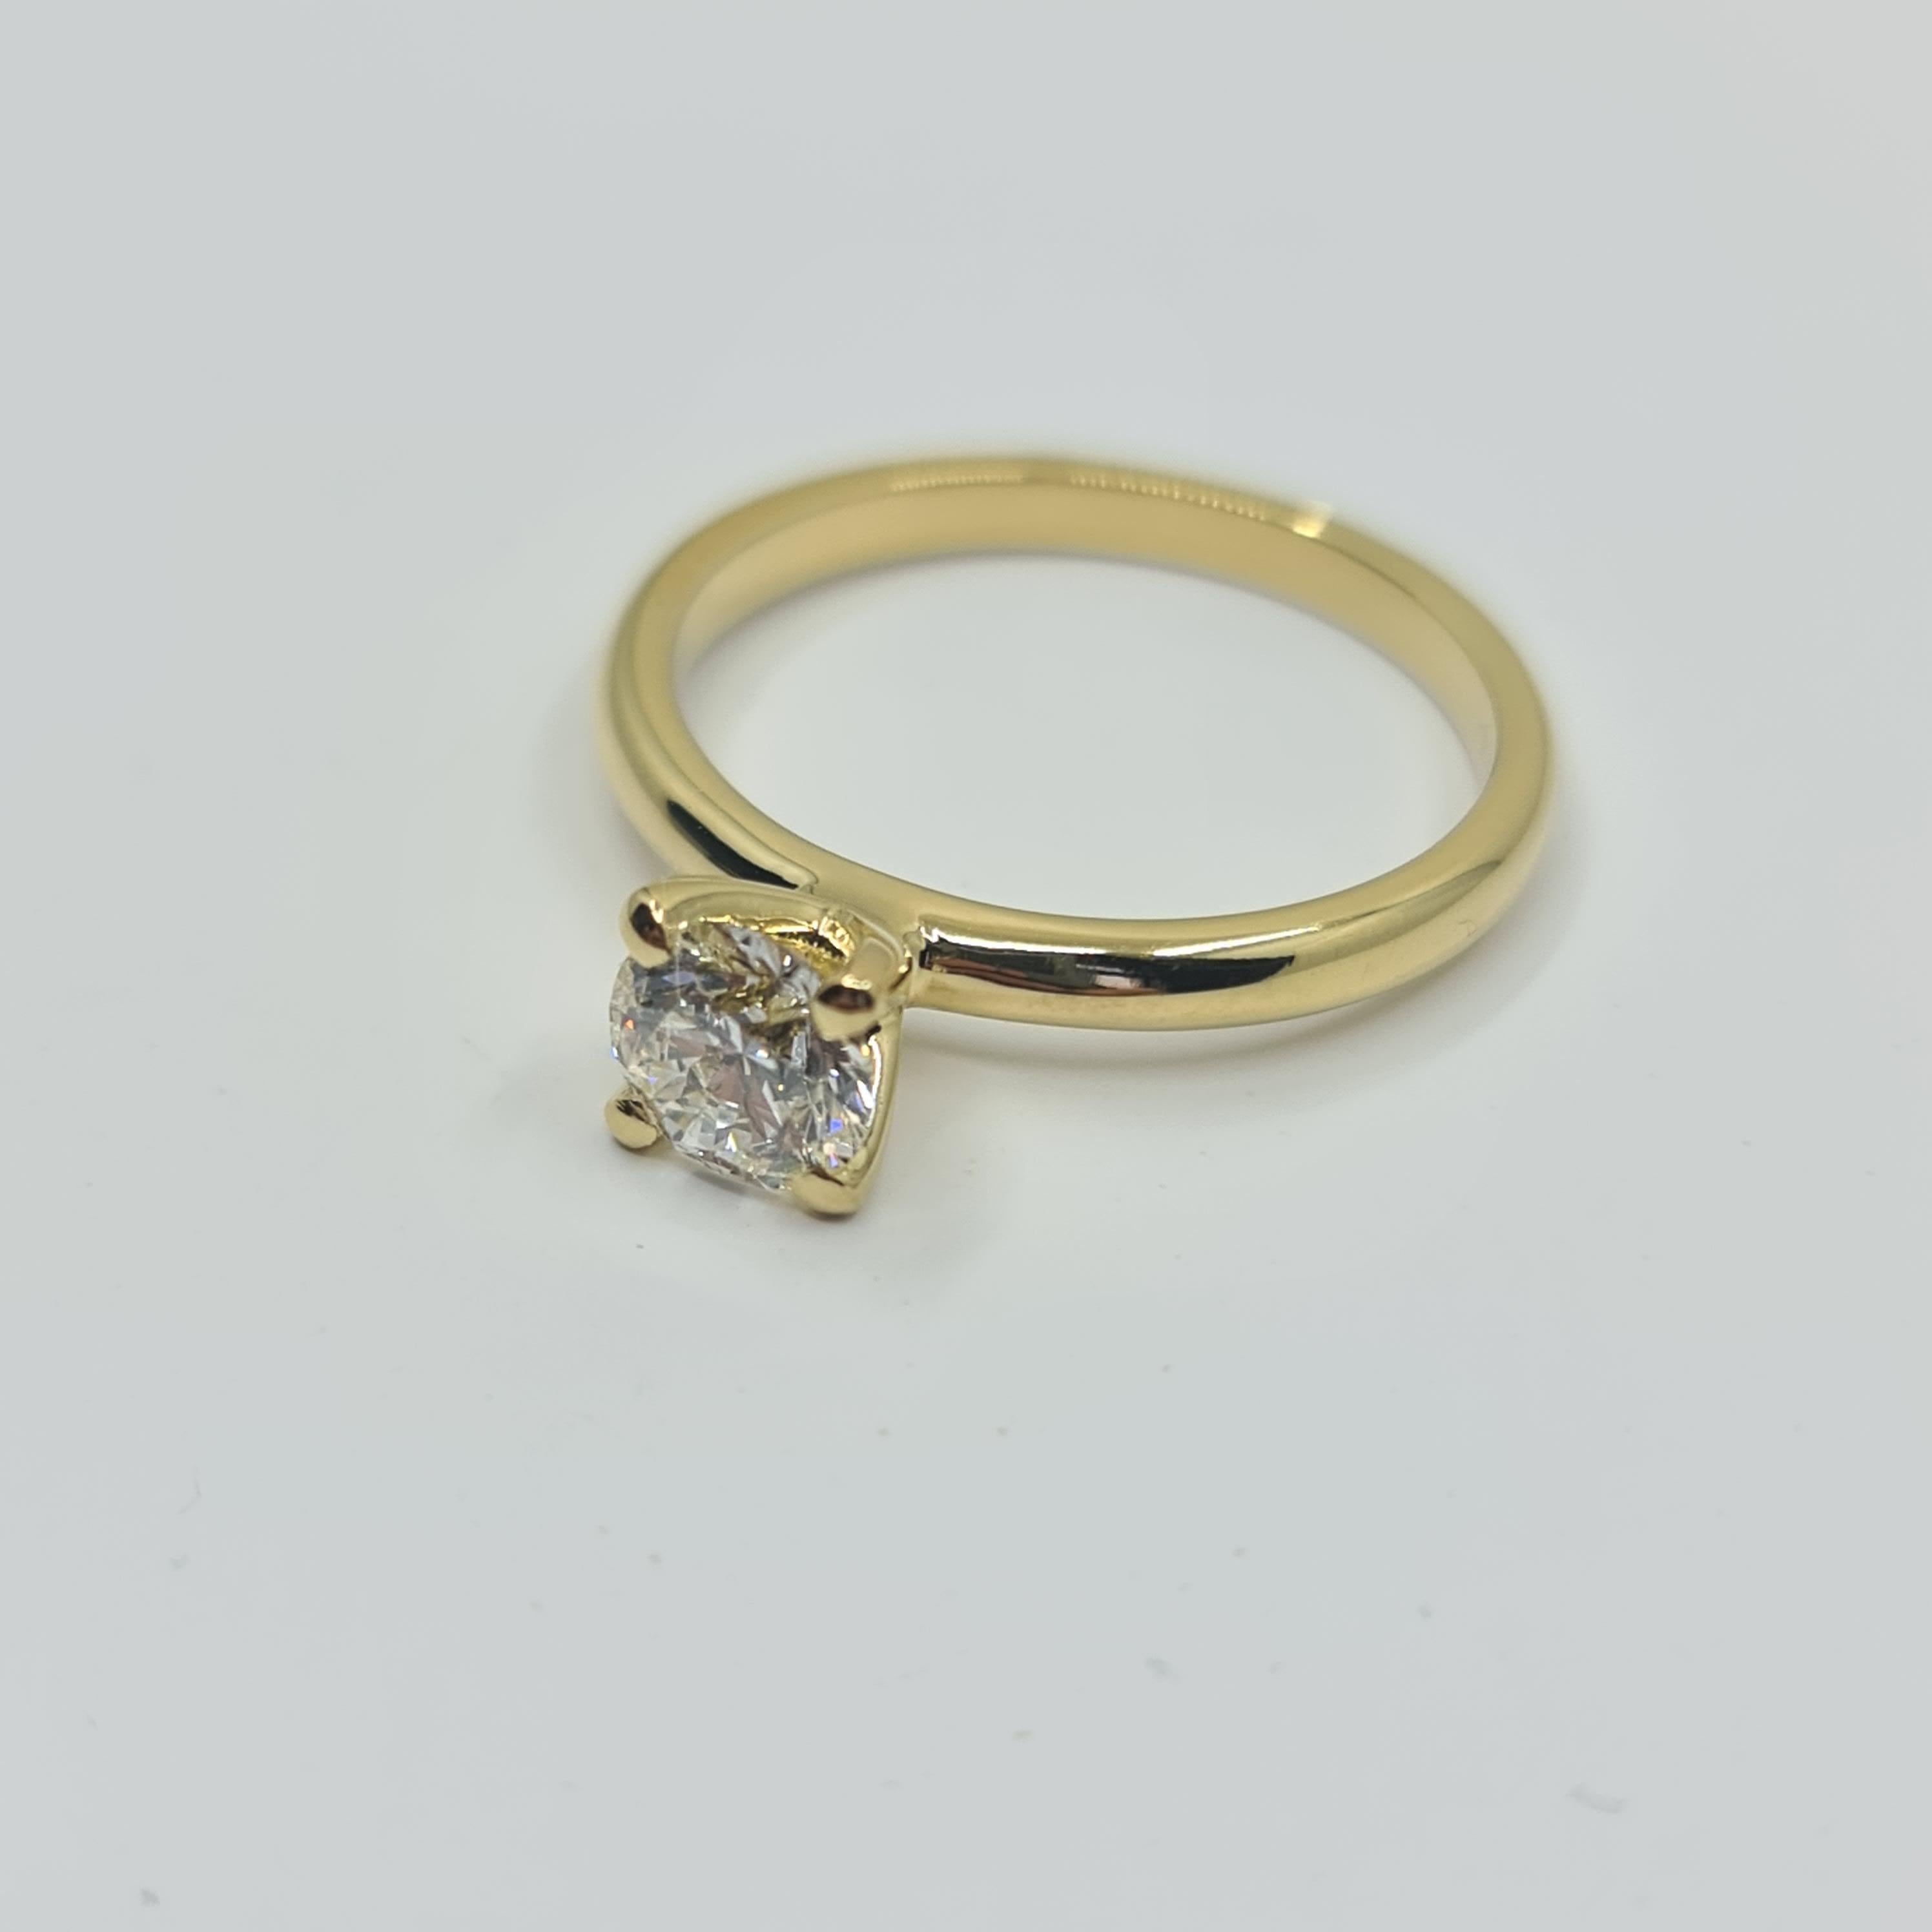 Brilliant Cut GIA Certified Diamond 1.00 Carat F/VVS1 Solitaire Ring in 4 Prong Setting For Sale